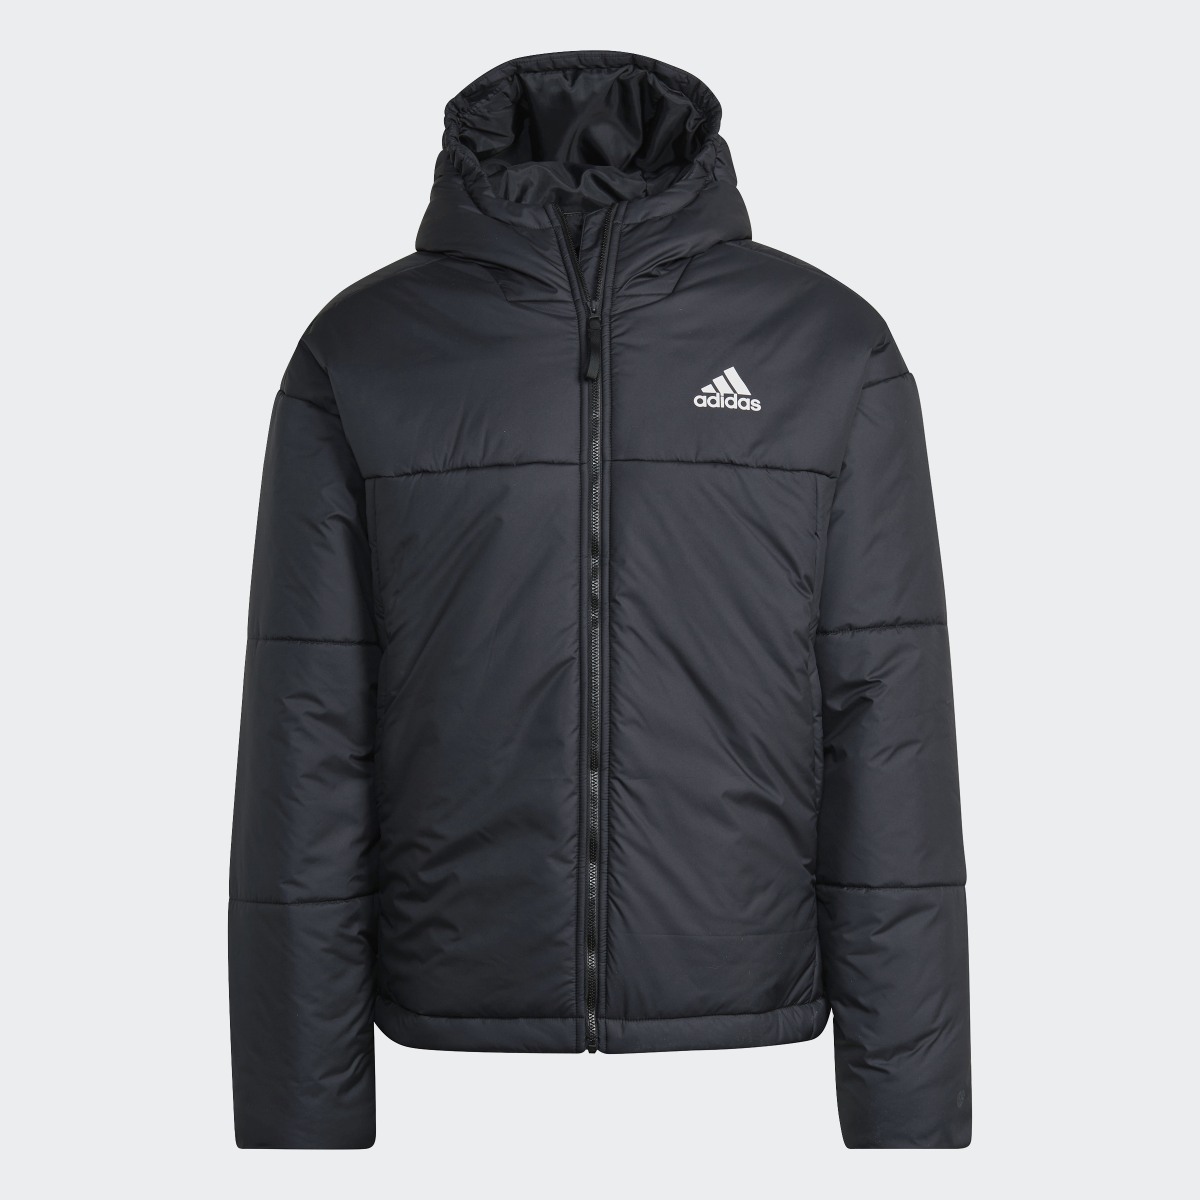 Adidas BSC 3-Stripes Puffy Hooded Jacket. 5